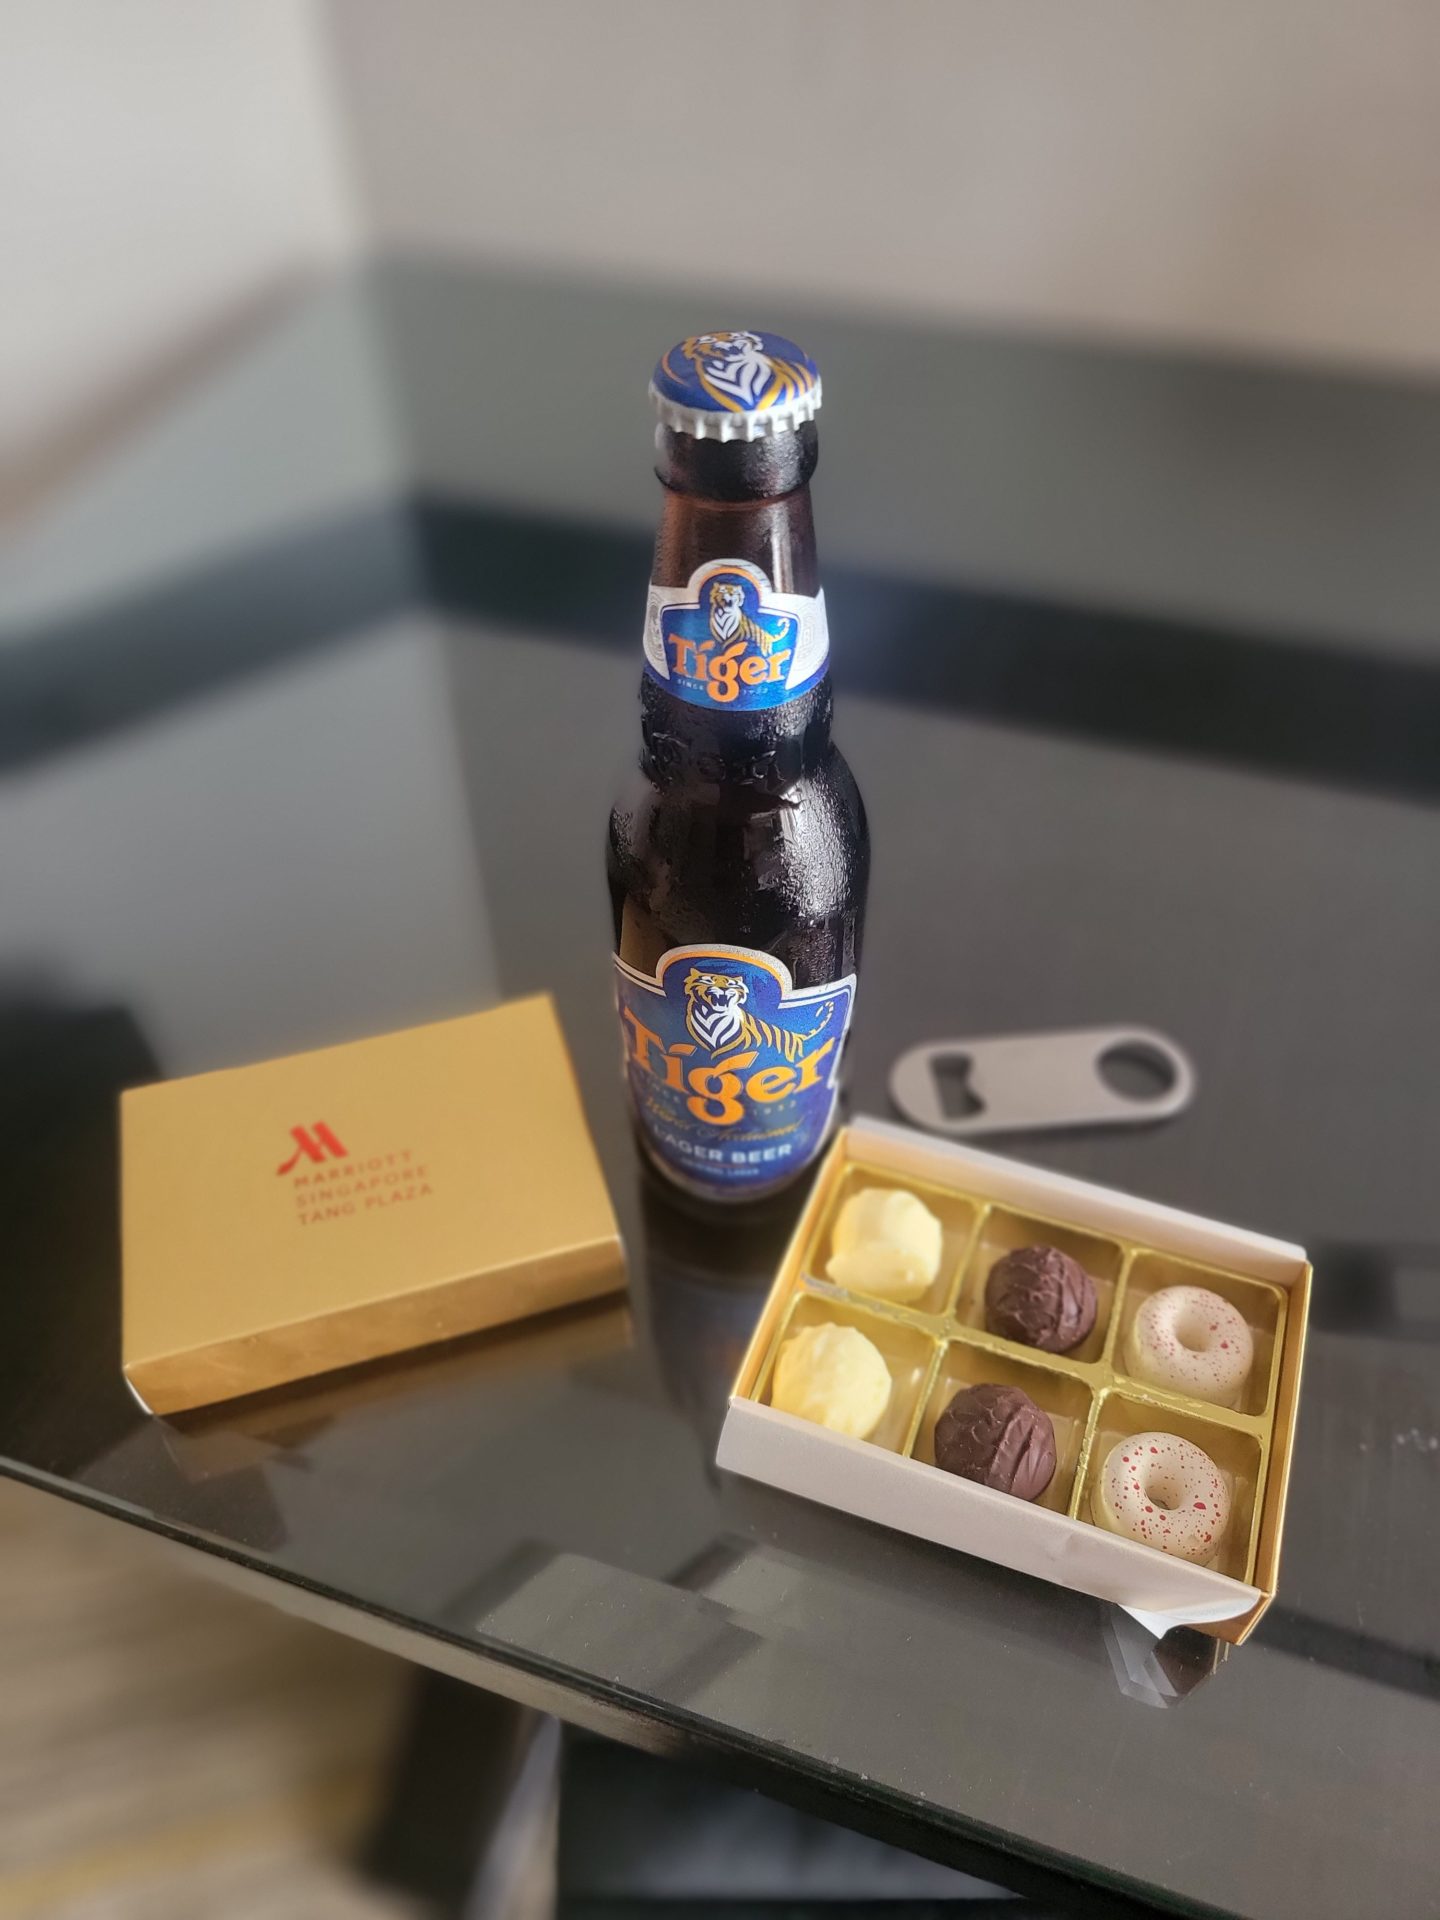 a bottle of beer next to a box of chocolates